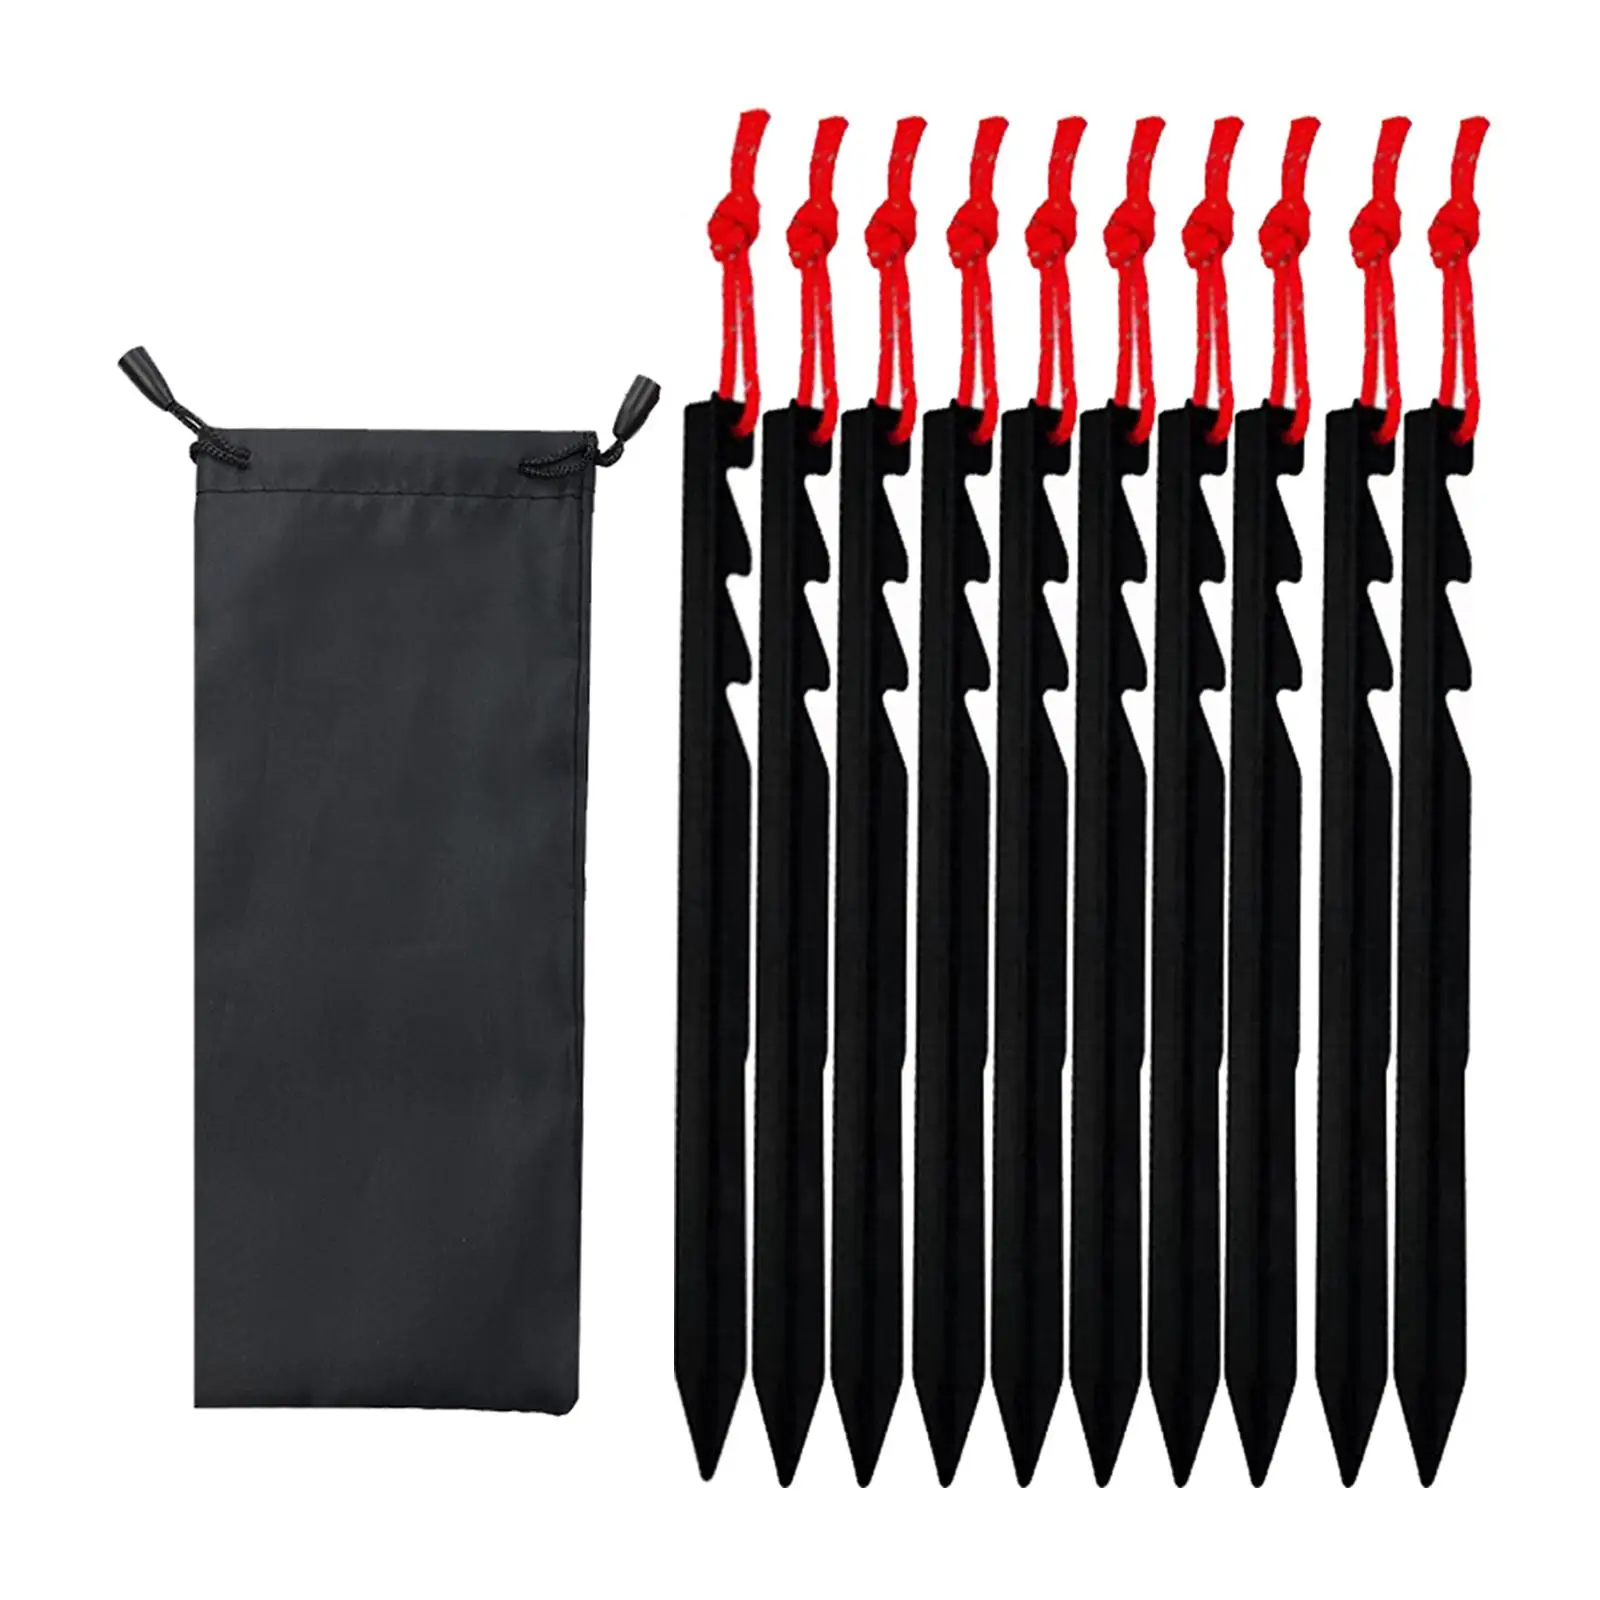 Camping Tent Nail Anchors Metal Stakes for Ground for Outdoor Hiking Dessert